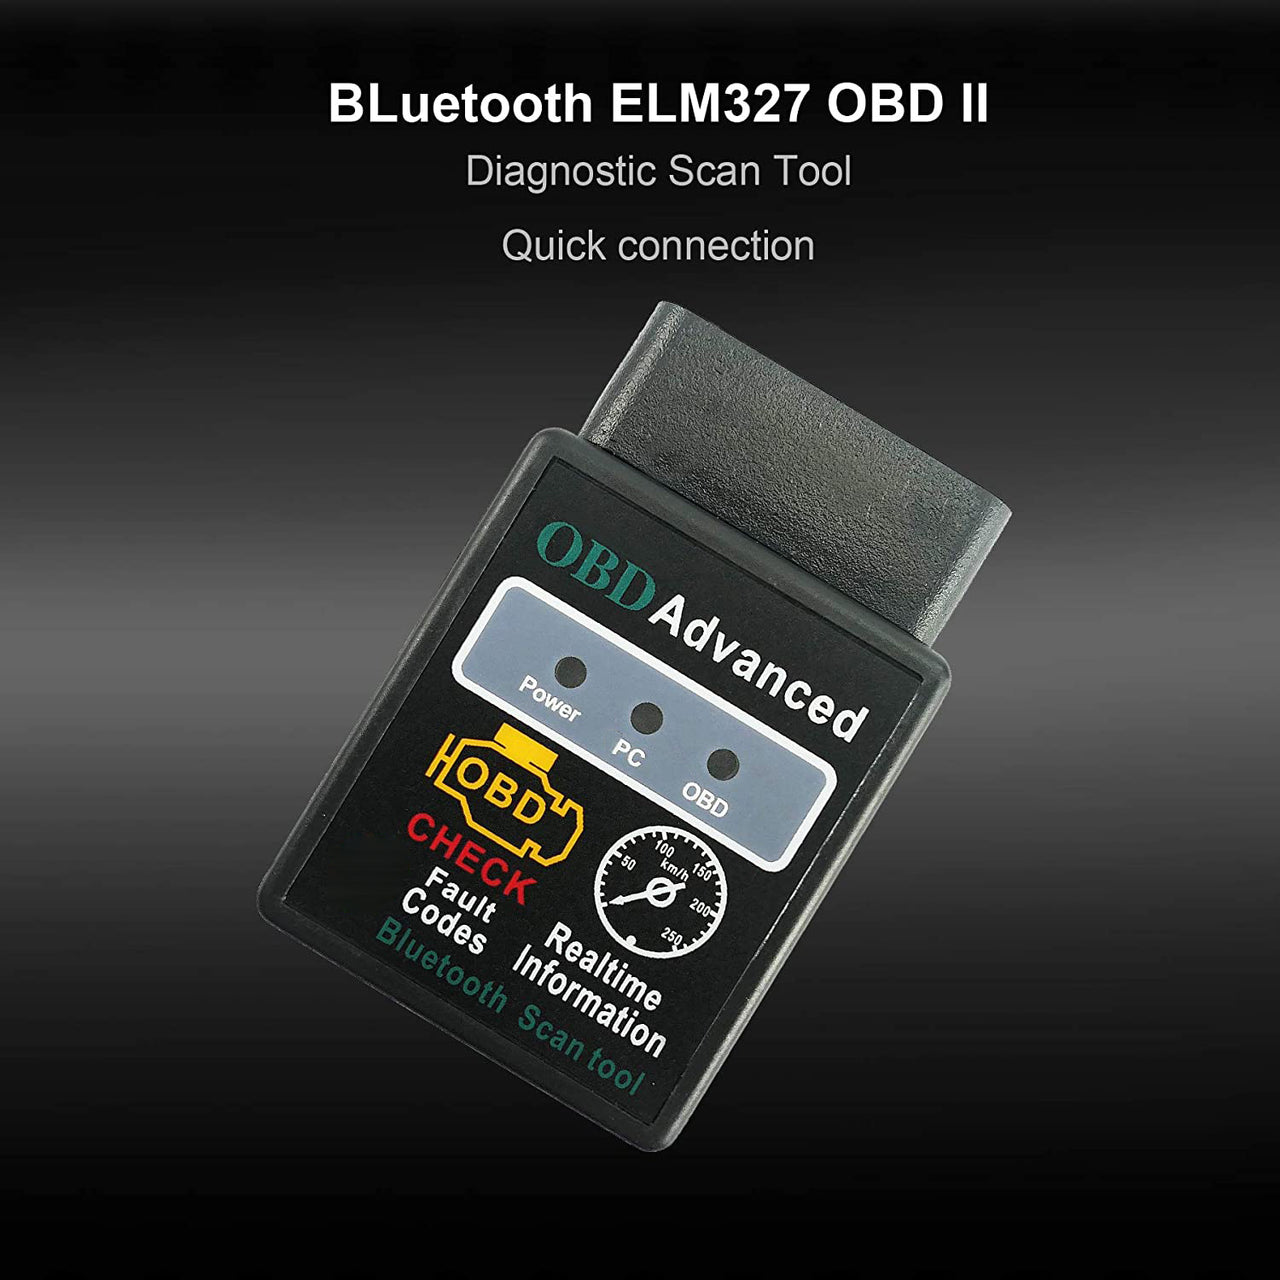 OBD2 Scanner Adapter, Bluetooth ELM327 OBD2 OBDII Diagnostic Scanner Tool Adapter, Compatible with All OBD-II Vehicles Radios, for Android 4.4 to 10 System for GA9451,GA9449,GA9480A